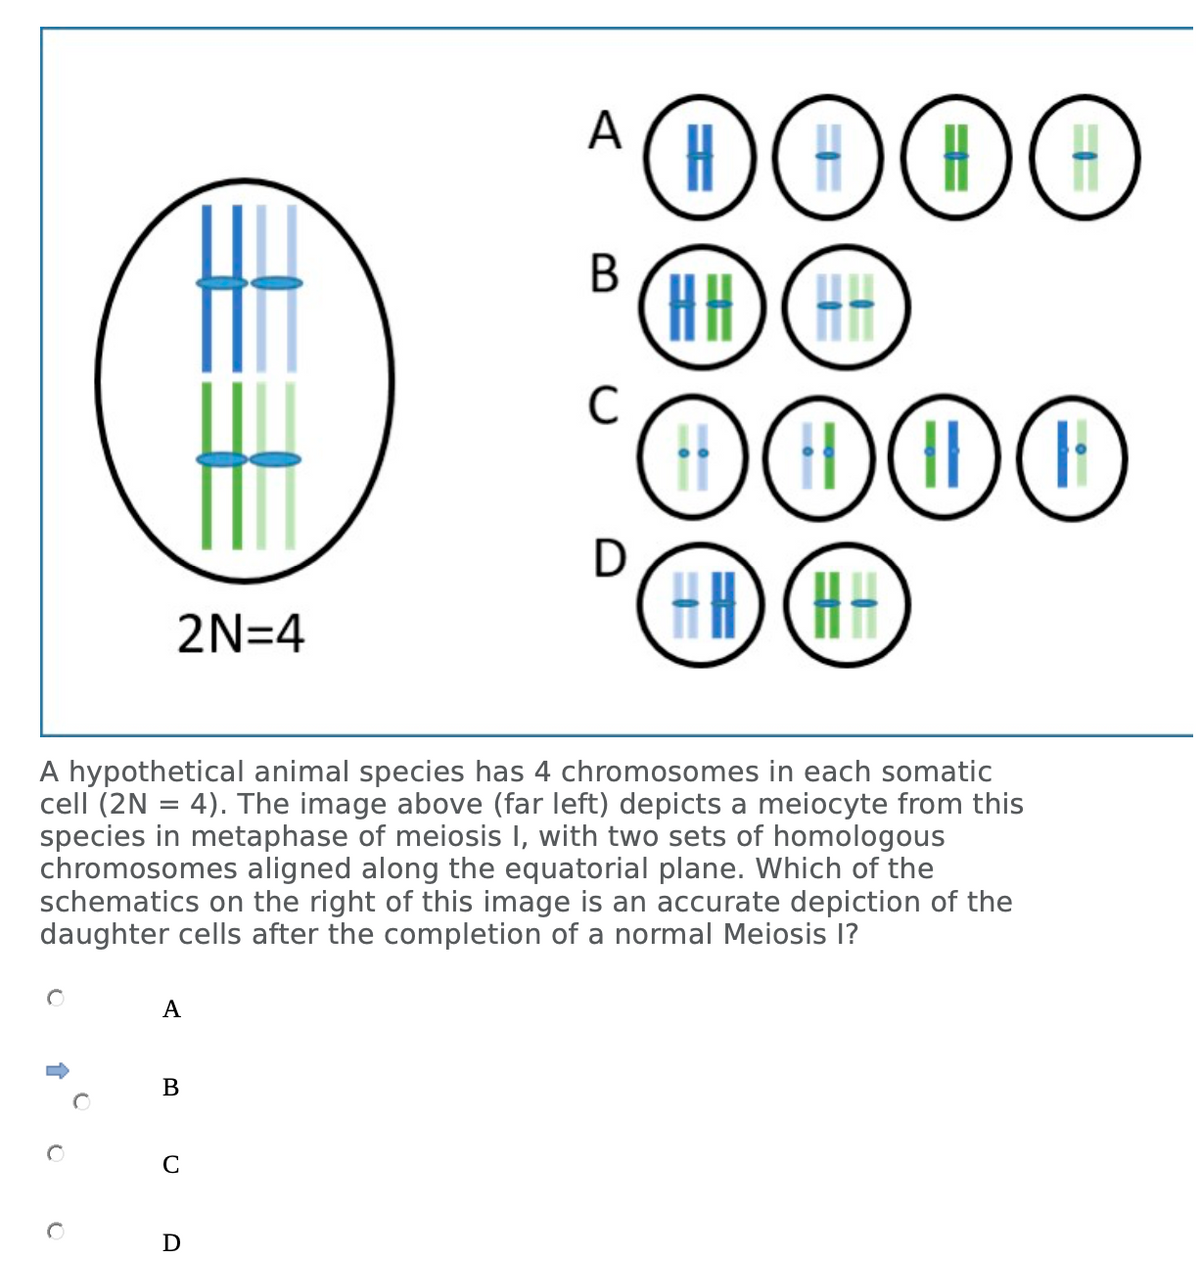 O
2N=4
A
B
*)
C
|
D
A
A hypothetical animal species has 4 chromosomes in each somatic
cell (2N = 4). The image above (far left) depicts a meiocyte from this
species in metaphase of meiosis I, with two sets of homologous
chromosomes aligned along the equatorial plane. Which of the
schematics on the right of this image is an accurate depiction of the
daughter cells after the completion of a normal Meiosis I?
B (HH HH
с
0000
D
DADADCH
(HH) (AH